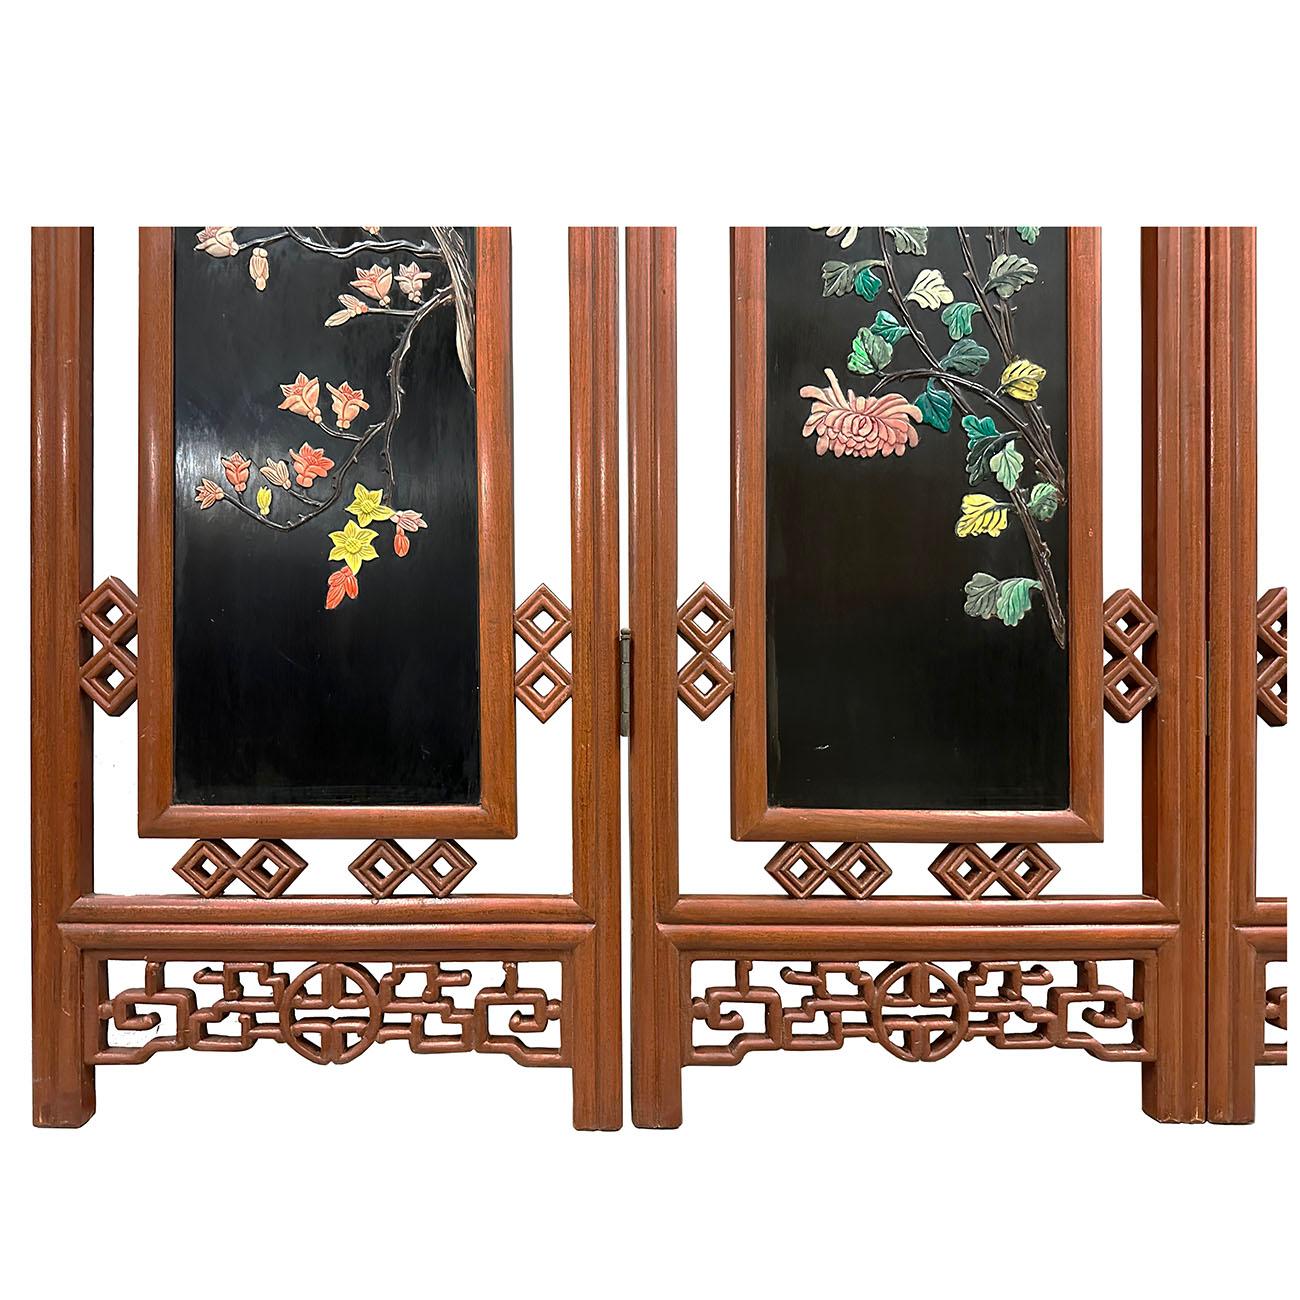 Mid-20th Century Chinese Hardwood Folding Screen/Room Divider with Soapstone Inl In Good Condition For Sale In Pomona, CA